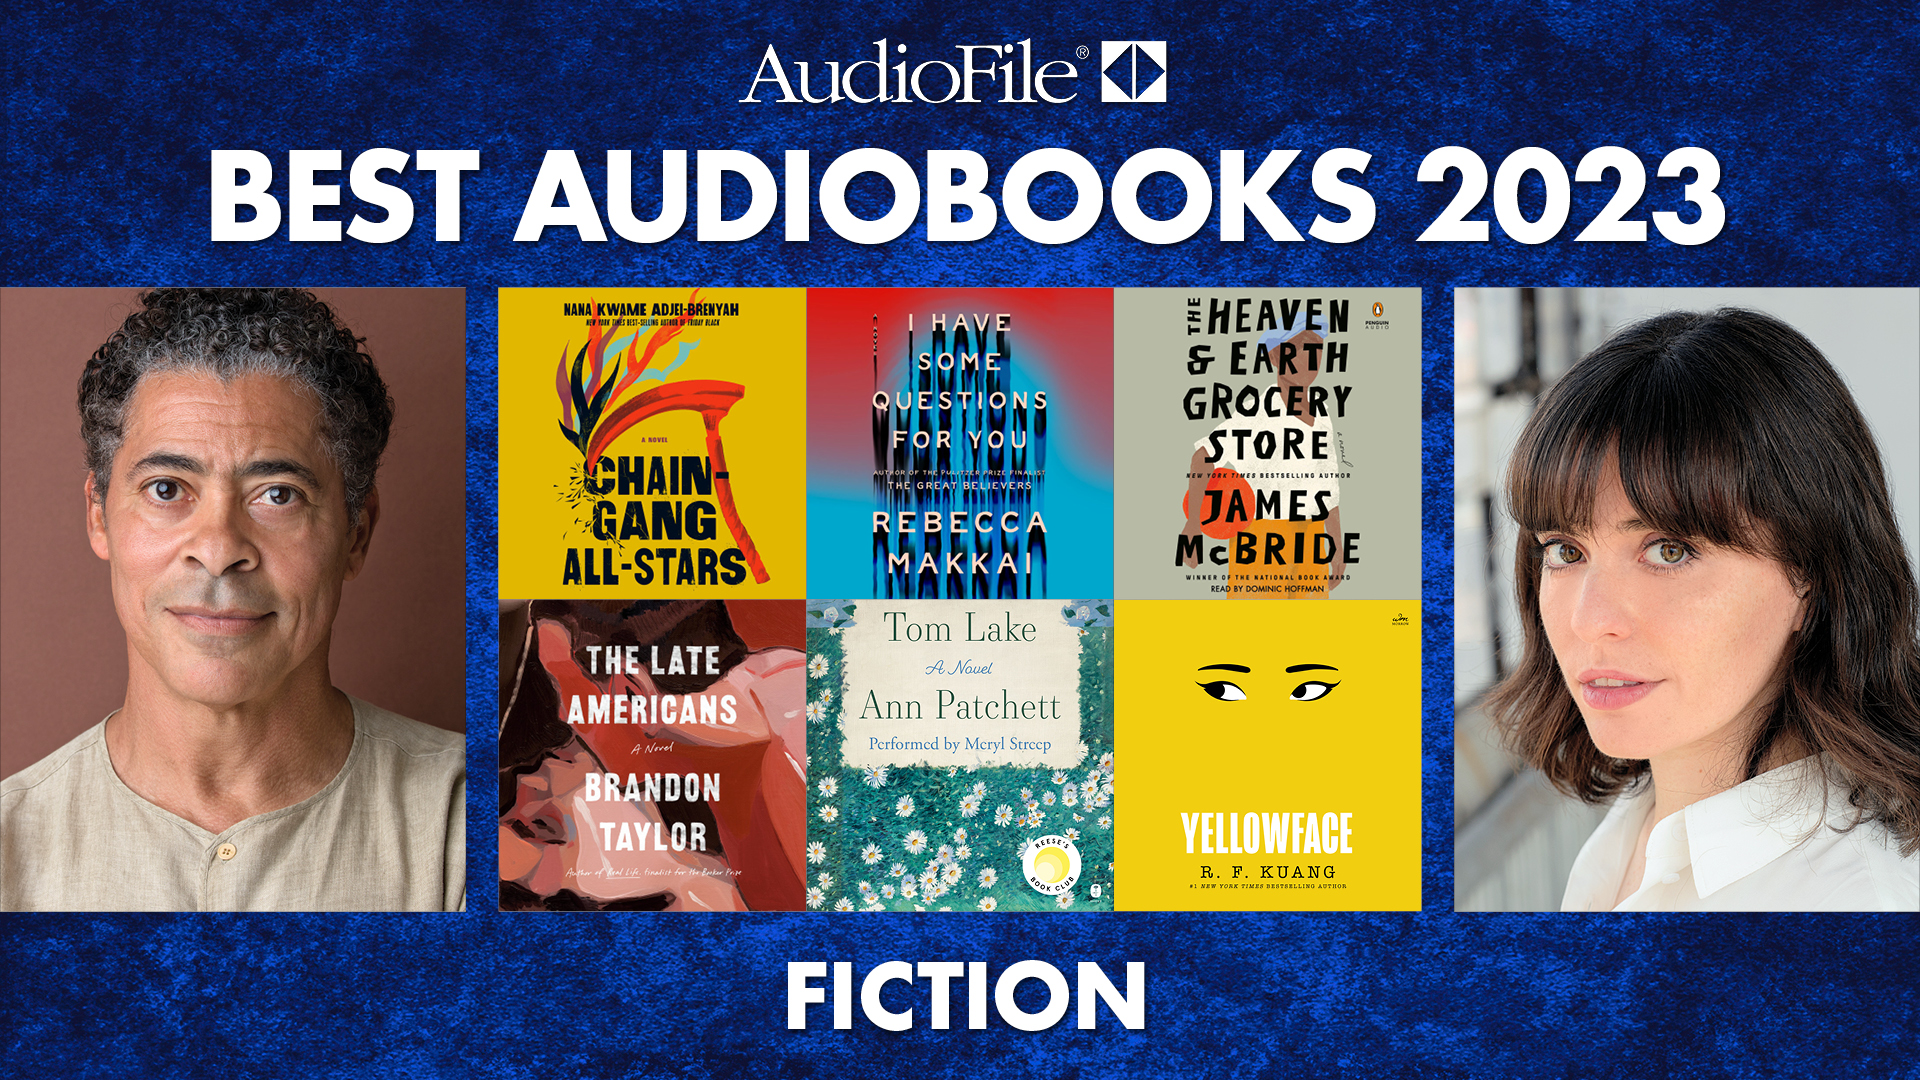 Top 20 Most Recommended Fiction Audiobooks of All Time - Libro.fm Audiobooks